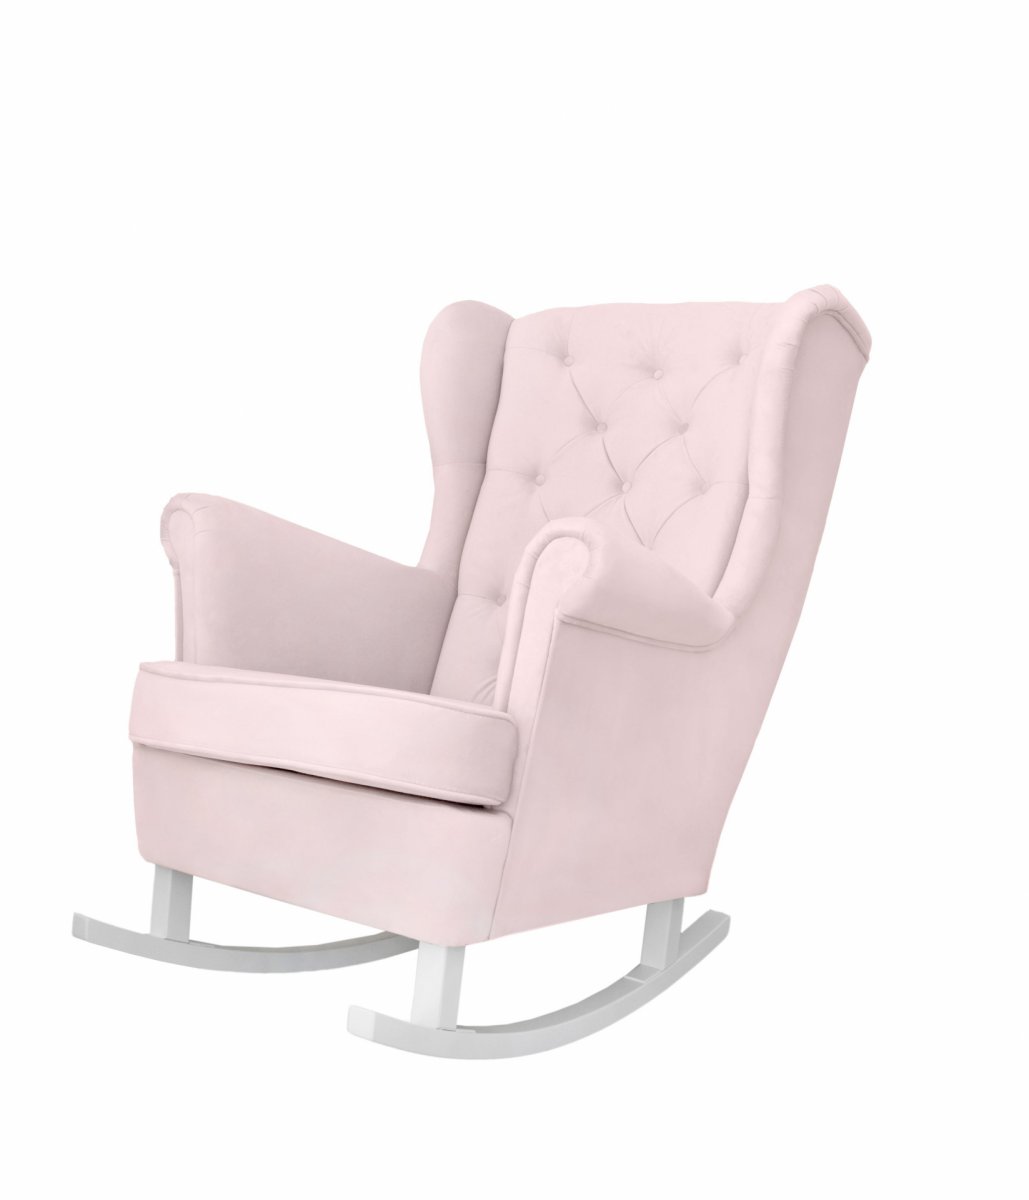 baby pink armchair